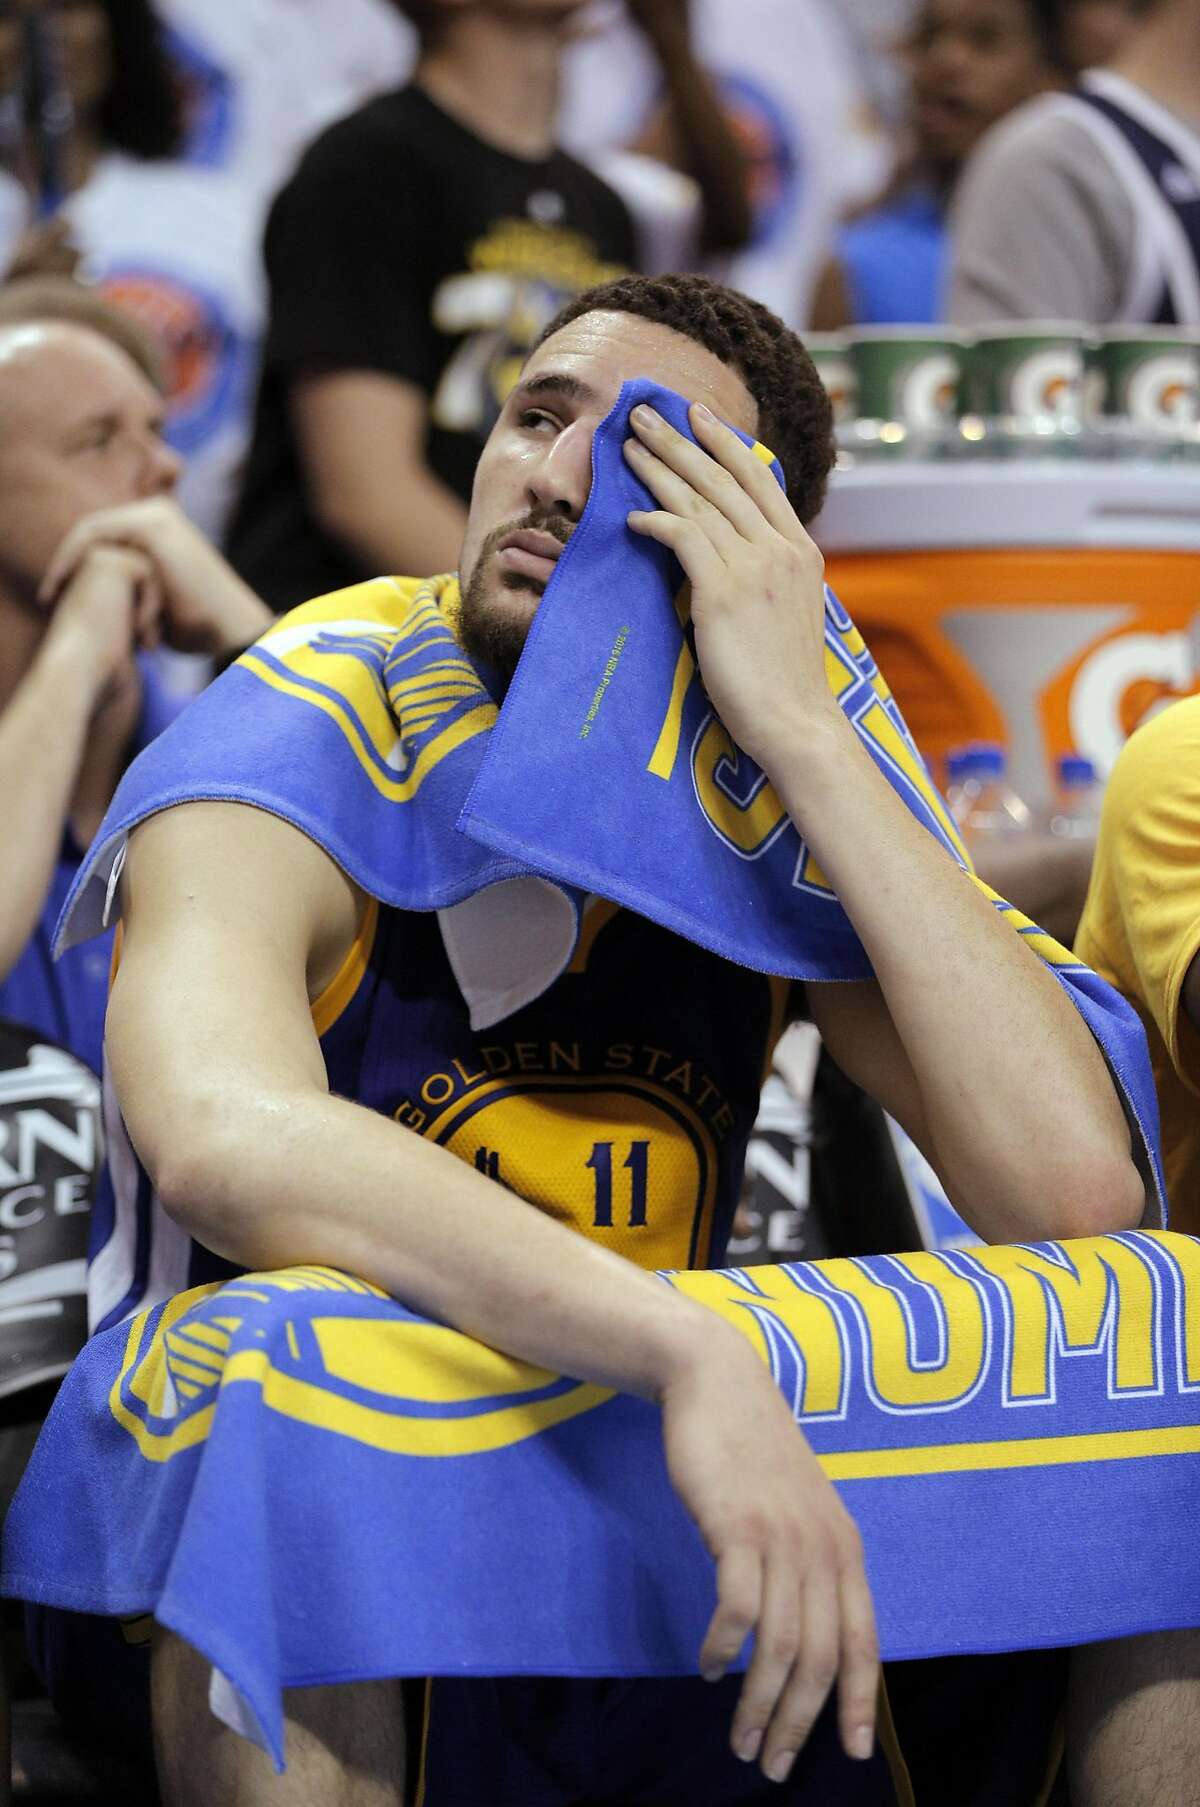 Klay Thompson (11) sits on the bench in the closing minutes of the second half as the Golden State Warriors played the Oklahoma City Thunder in Game 4 of the Western Conference Finals at Chesapeake Energy Arena in Oklahoma City, Okla., on Tuesday, May 24, 2016. The Thunder defeated the Warriors 118-94, to take a 3 games to 1 lead.